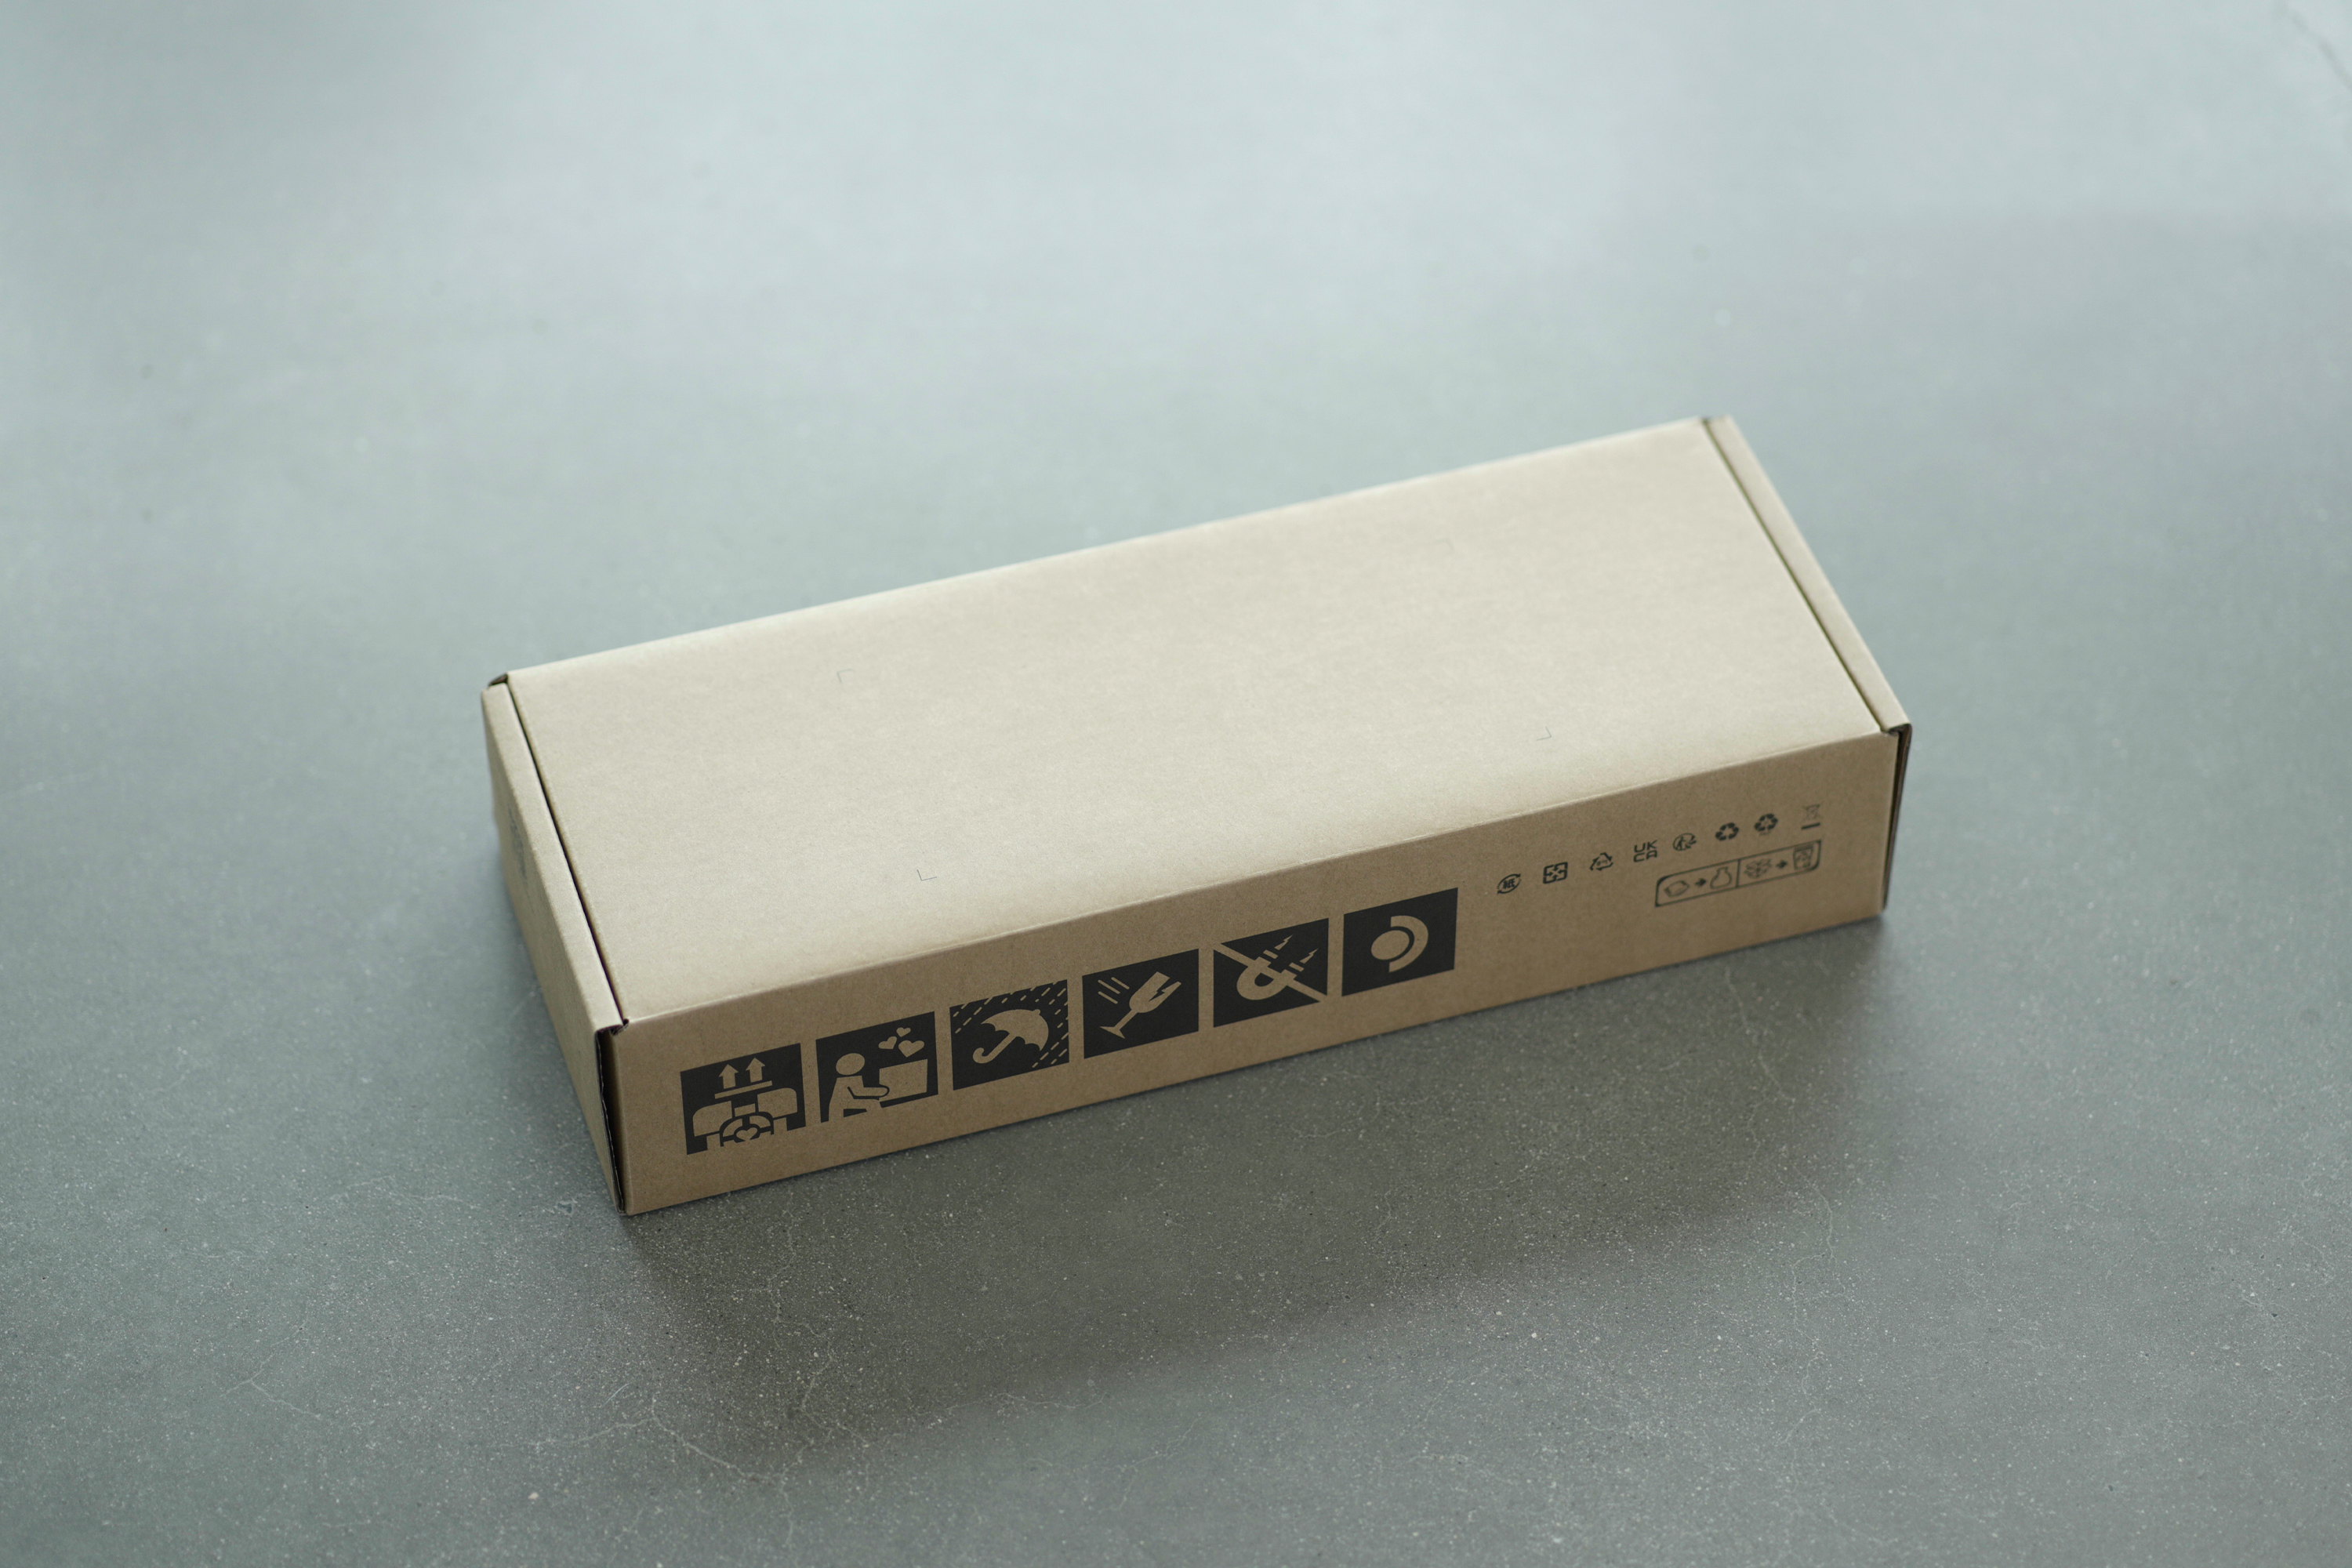 The Steam Deck's packaging and case